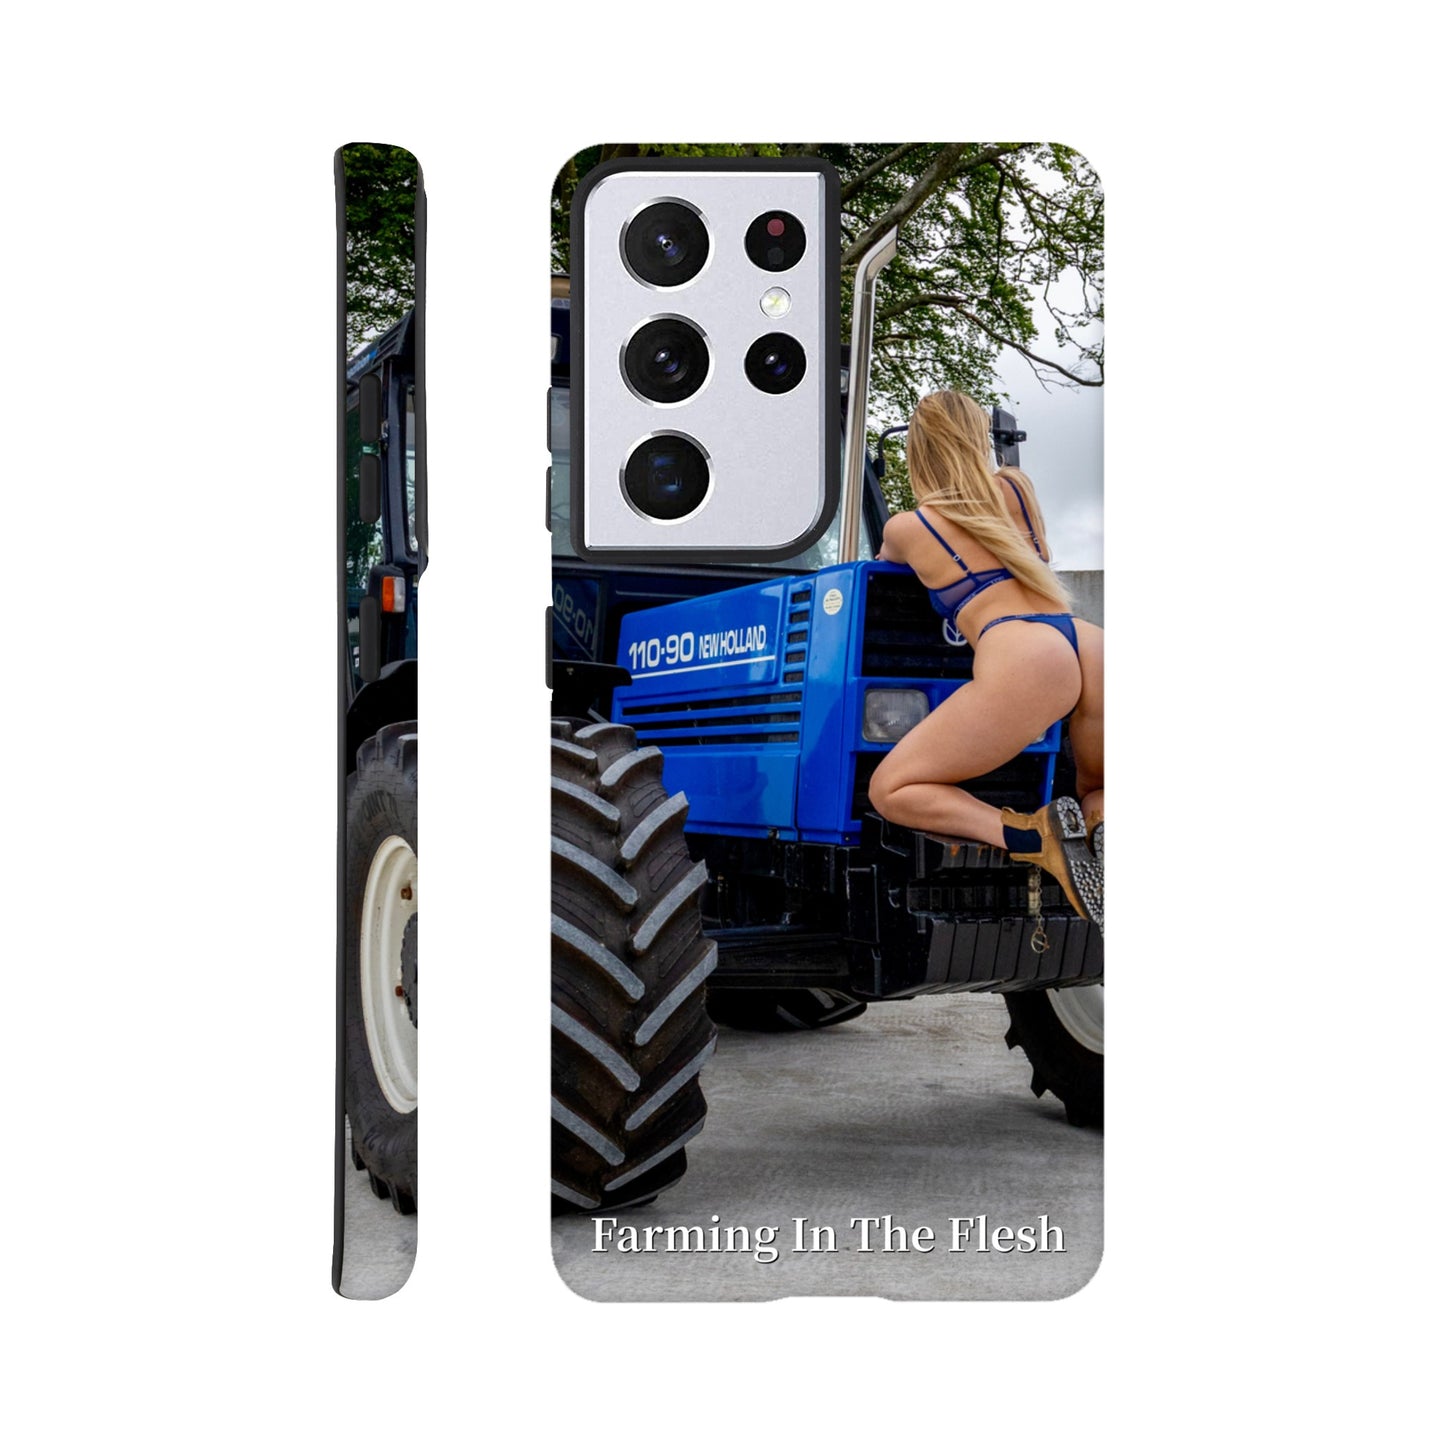 New Holland 110-90 Classic Phone Case